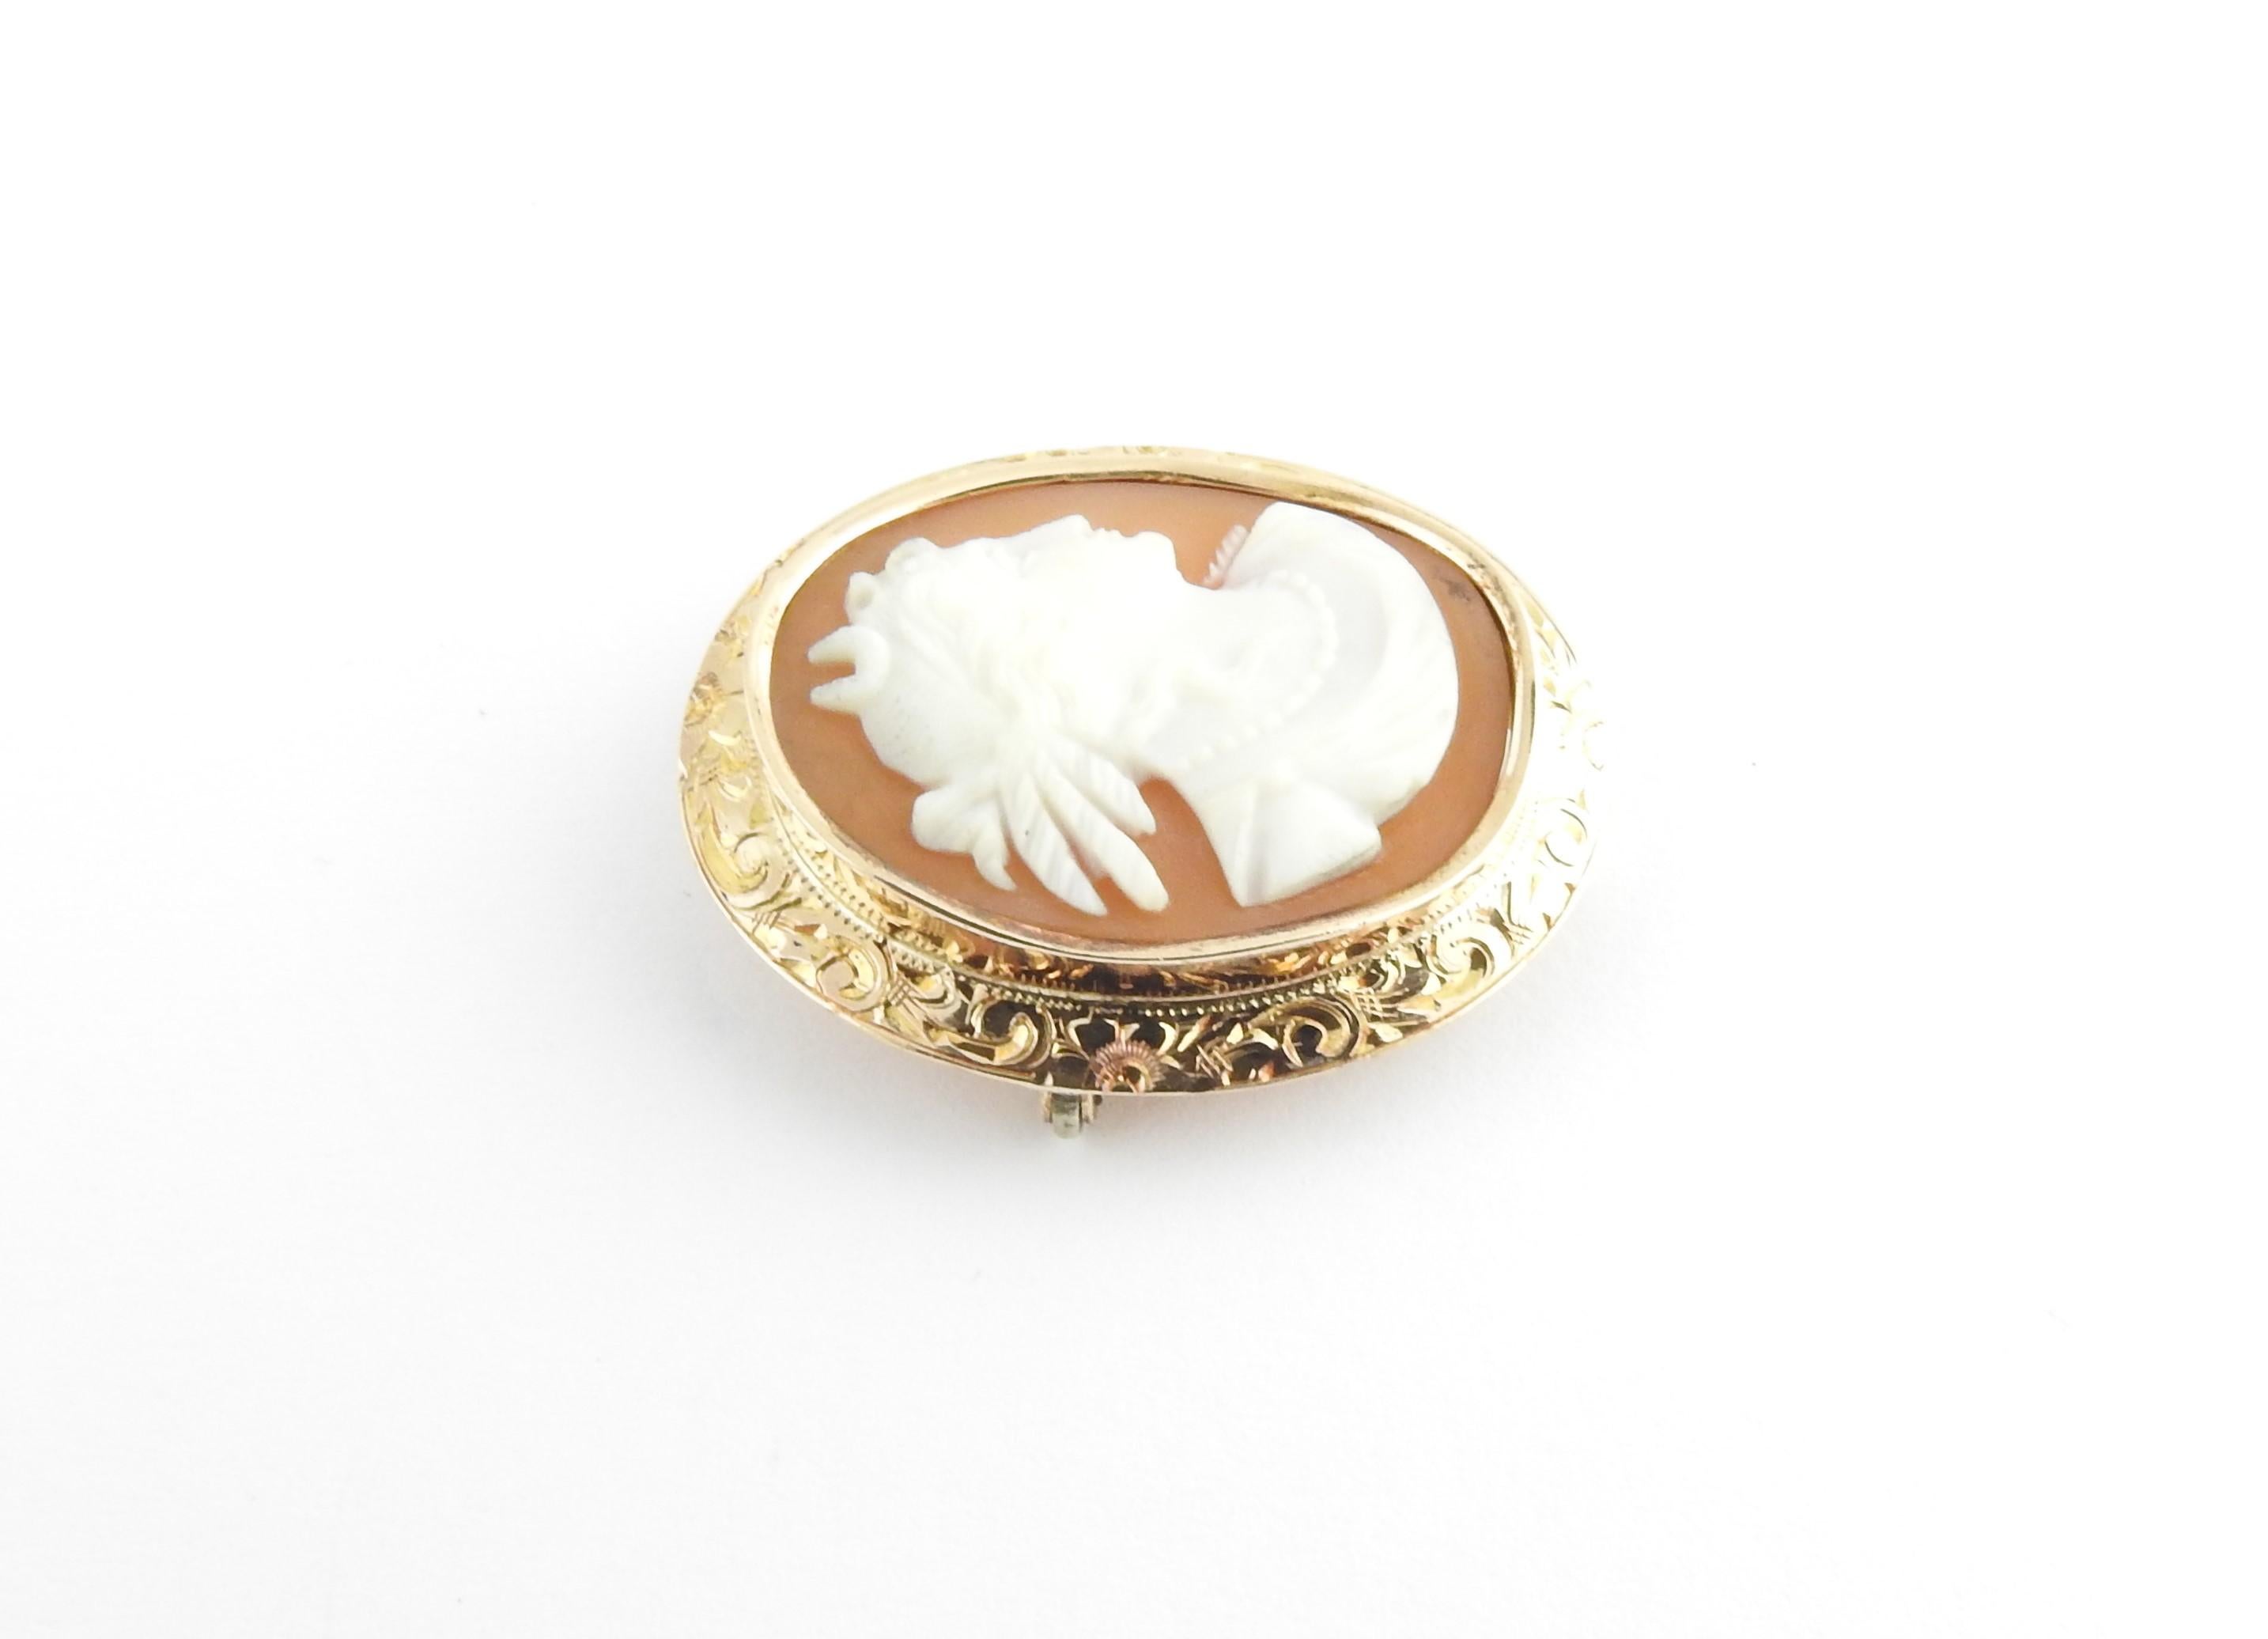 10 Karat Yellow Gold Cameo Brooch For Sale 2